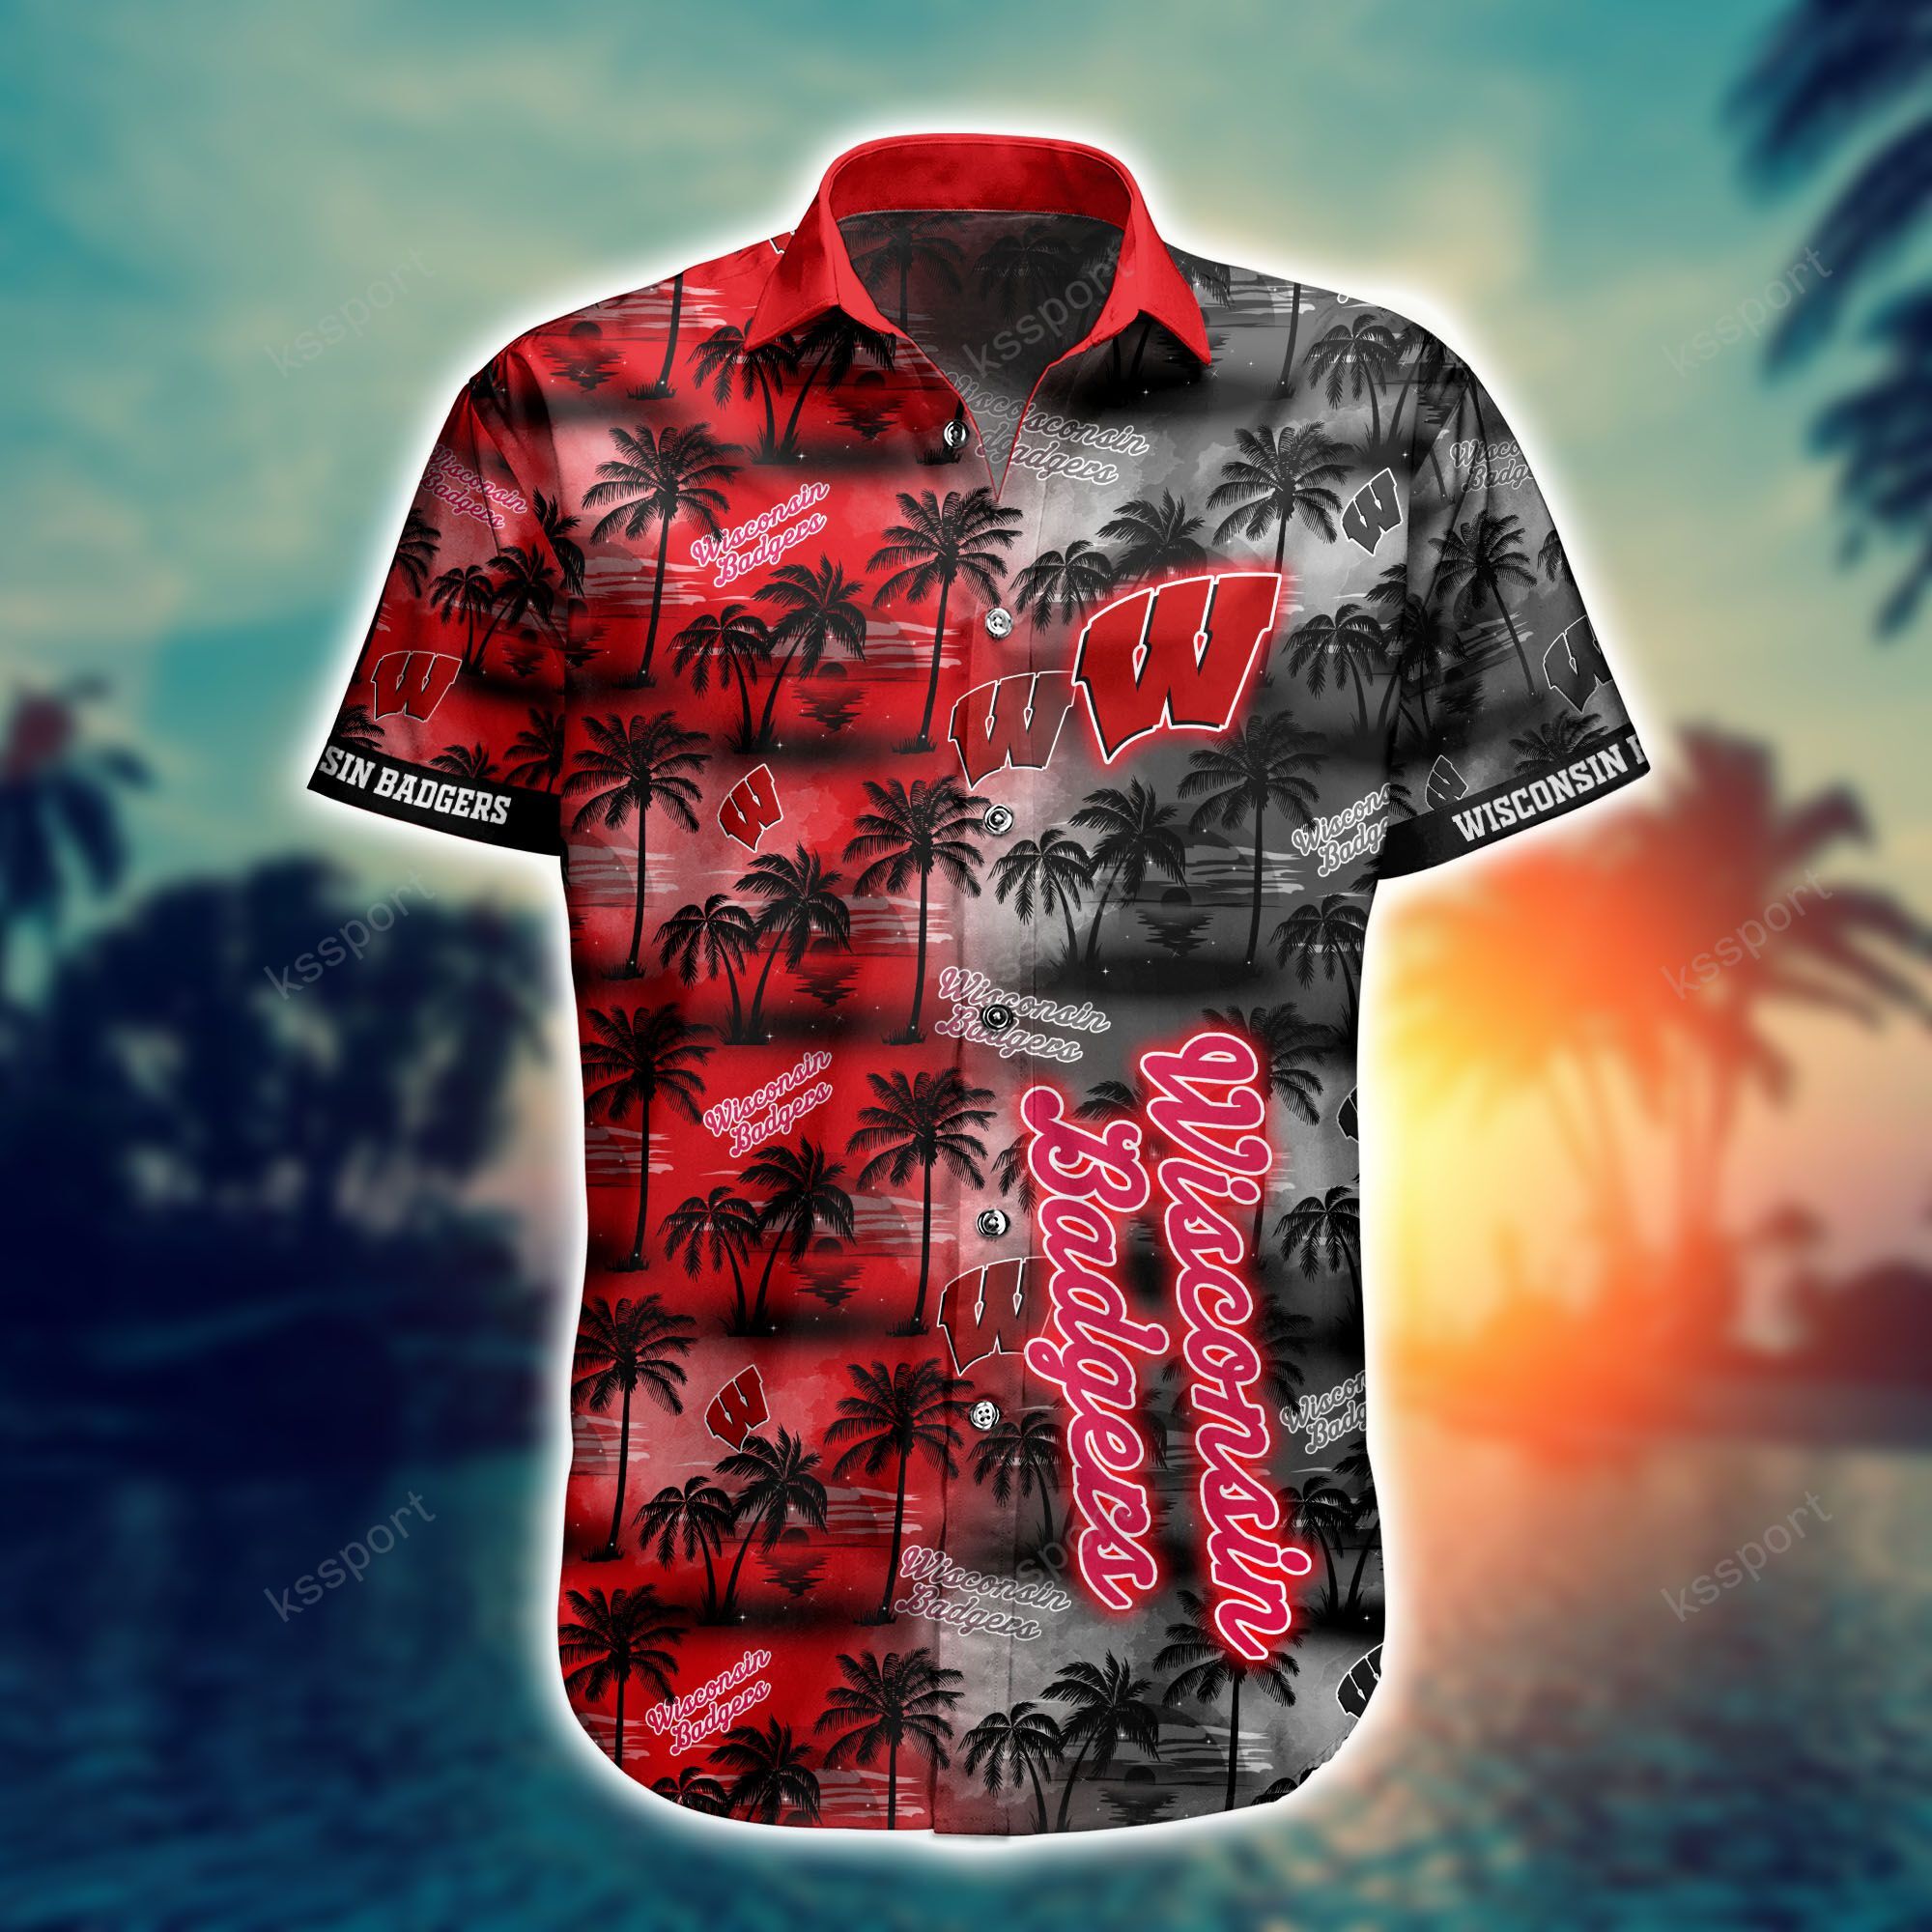 Top cool Hawaiian shirt 2022 - Make sure you get yours today before they run out! 190